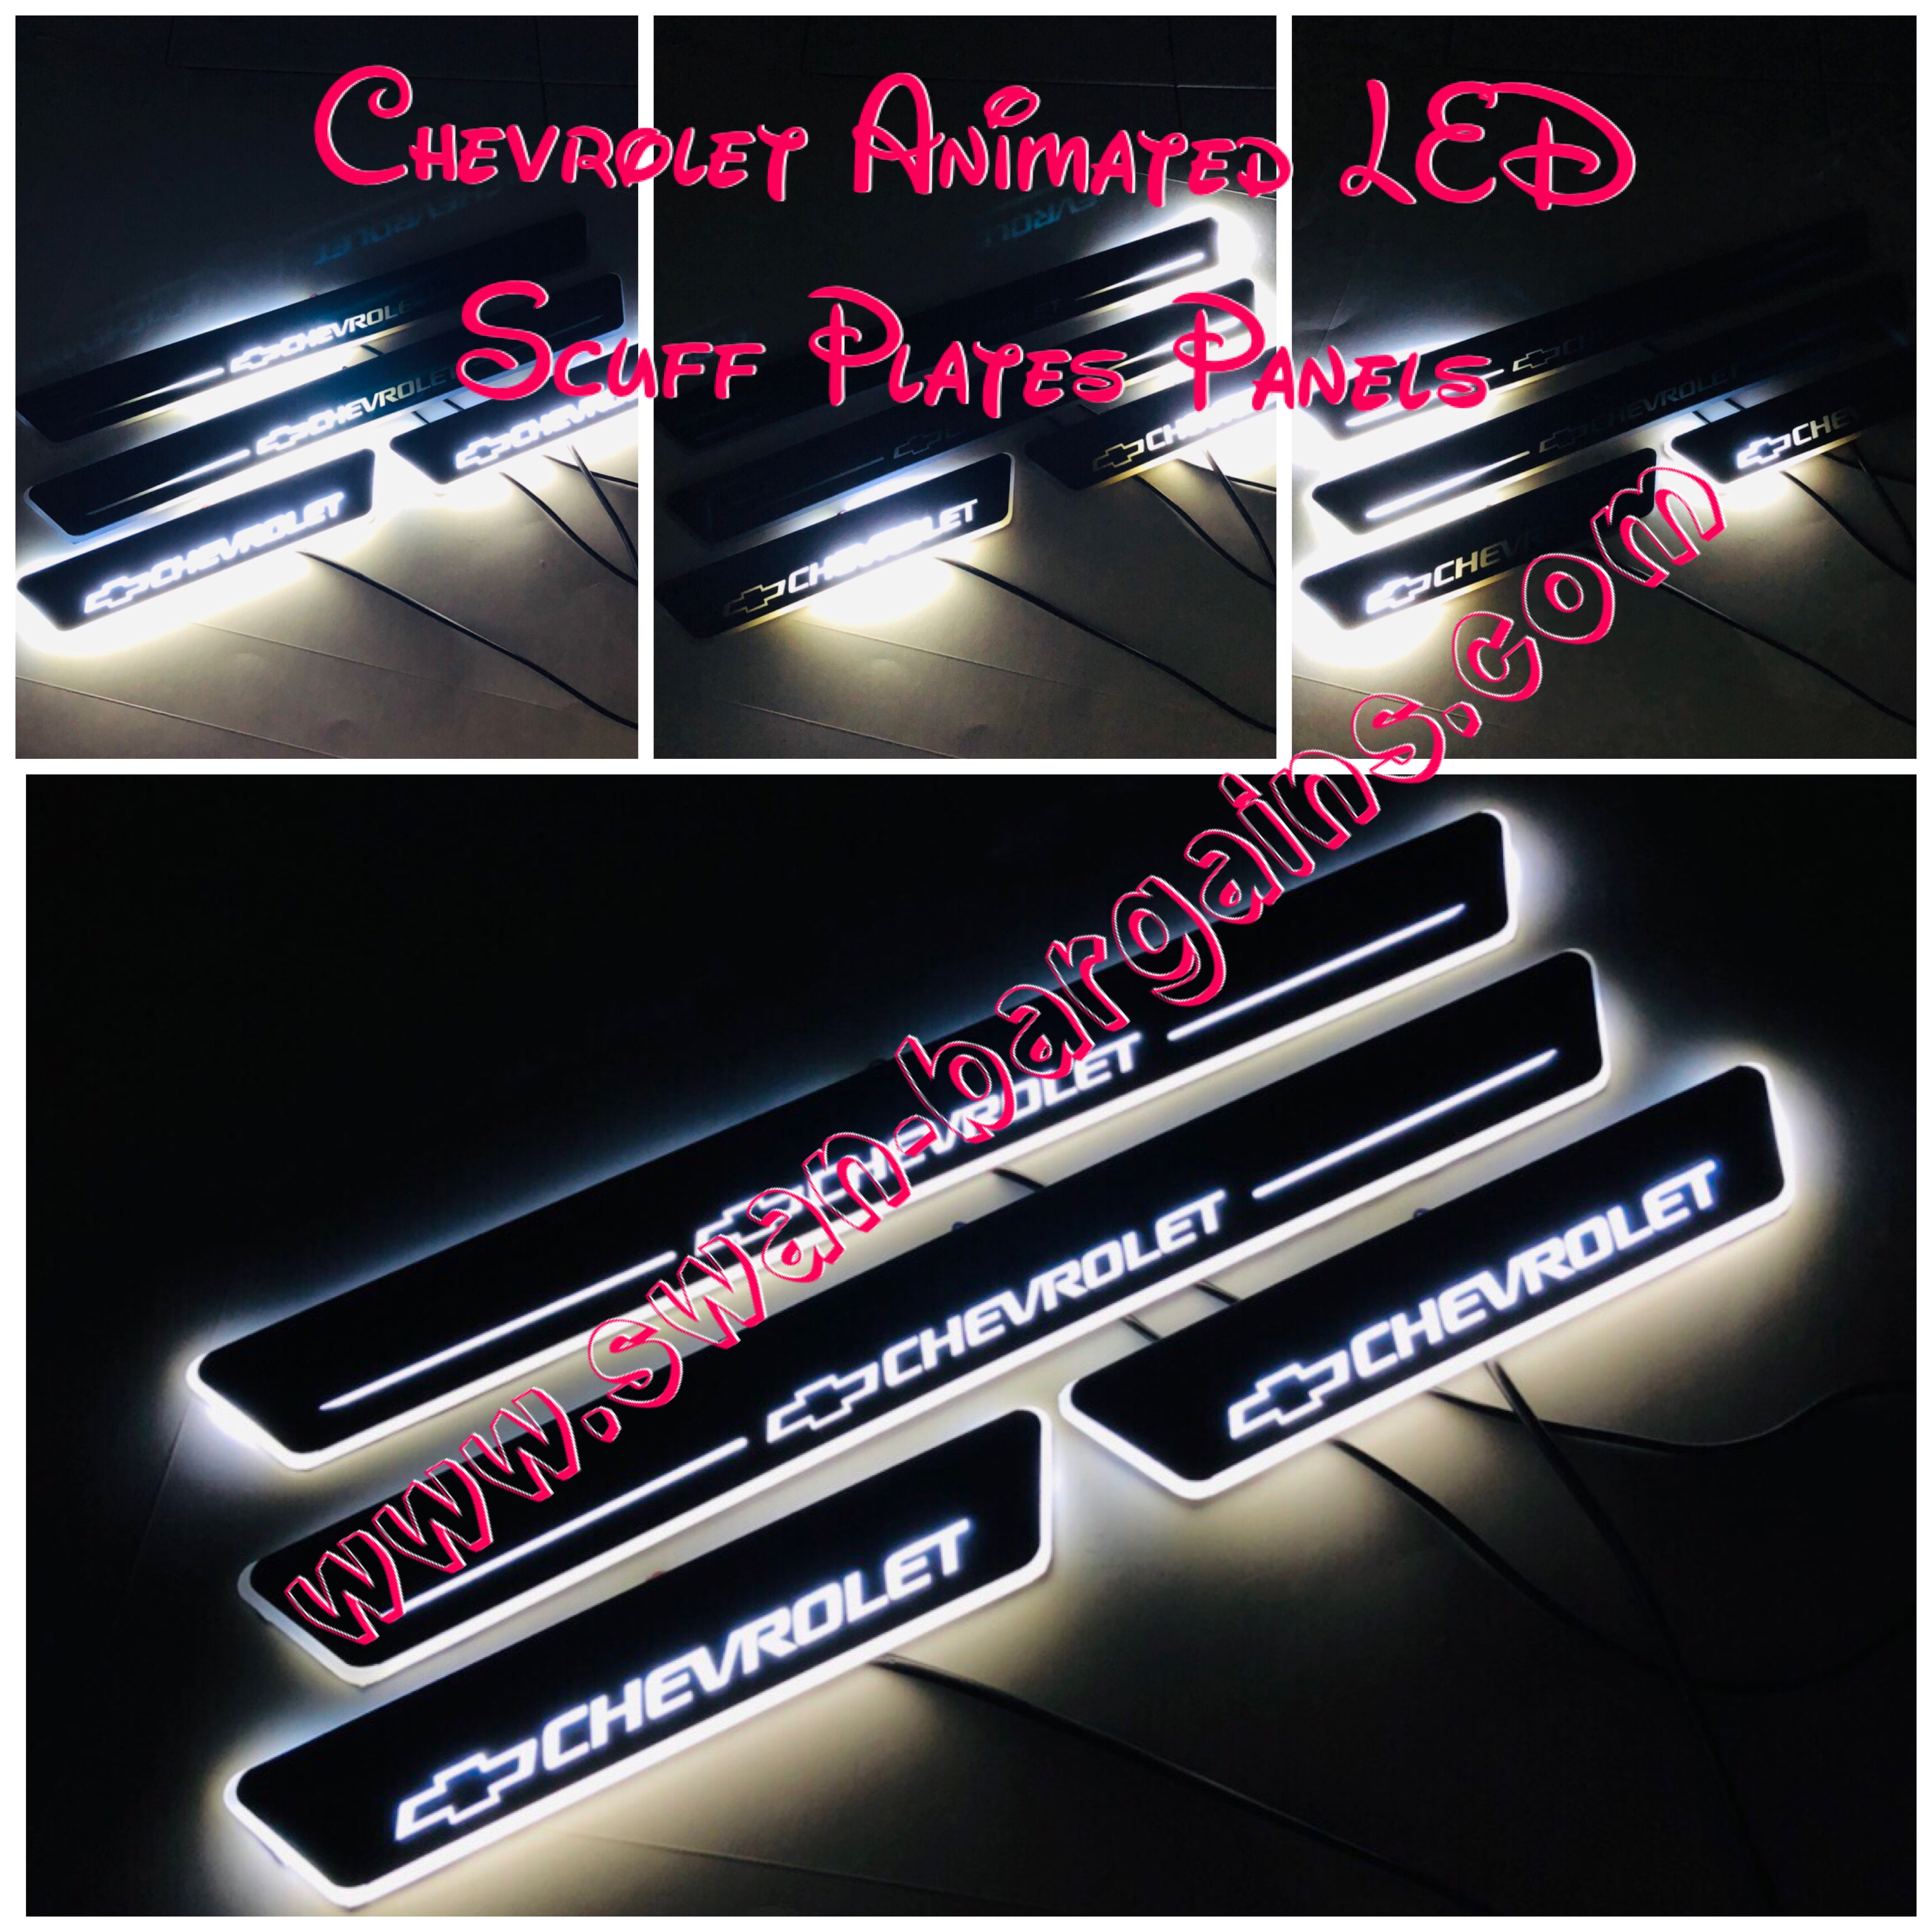 Chevrolet Animated LED Door Sill Plates Singapore - White